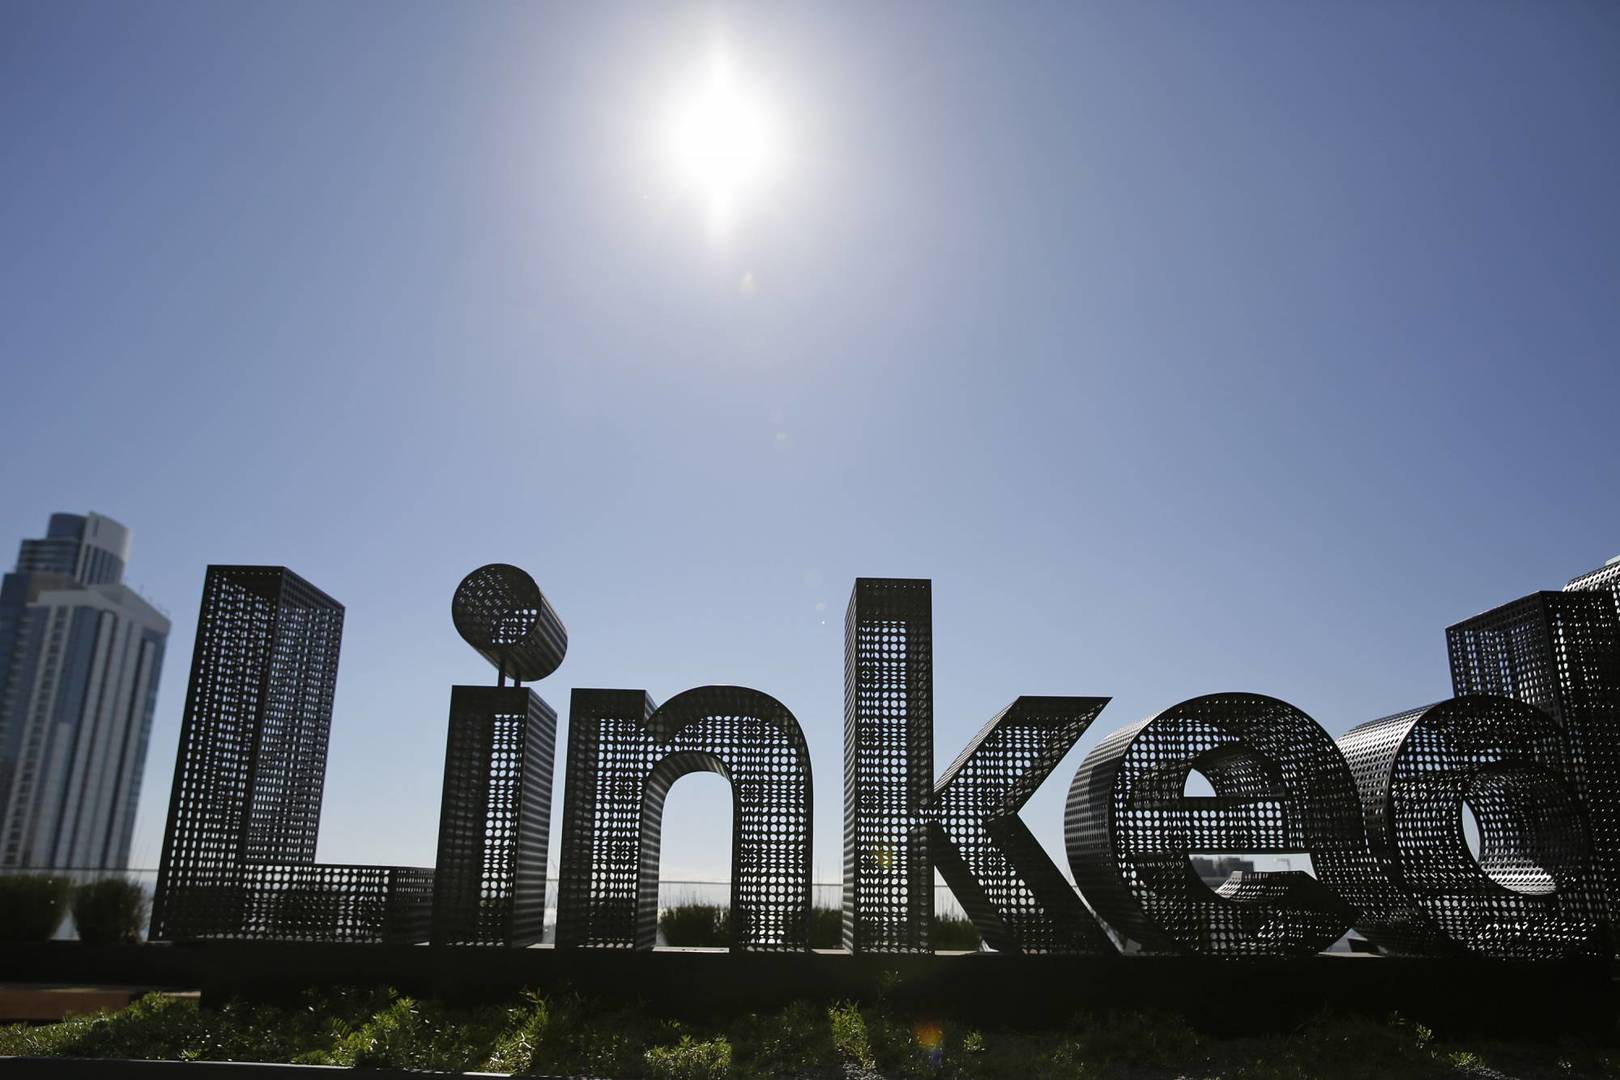 FILE - This Sept. 22, 2016, file photo shows a sculpture on a terrace outside the offices of LinkedIn in San Francisco. A federal appeals court has affirmed the right of a startup company to collect information from people's public profiles on networking service LinkedIn. The U.S. Court of Appeals for the Ninth Circuit in San Francisco upheld a previous ruling Monday, Sept. 9. 2019, siding with hiQ Labs, a San Francisco company that analyzes workforce data scraped from profiles. (AP Photo/Eric Risberg, File)